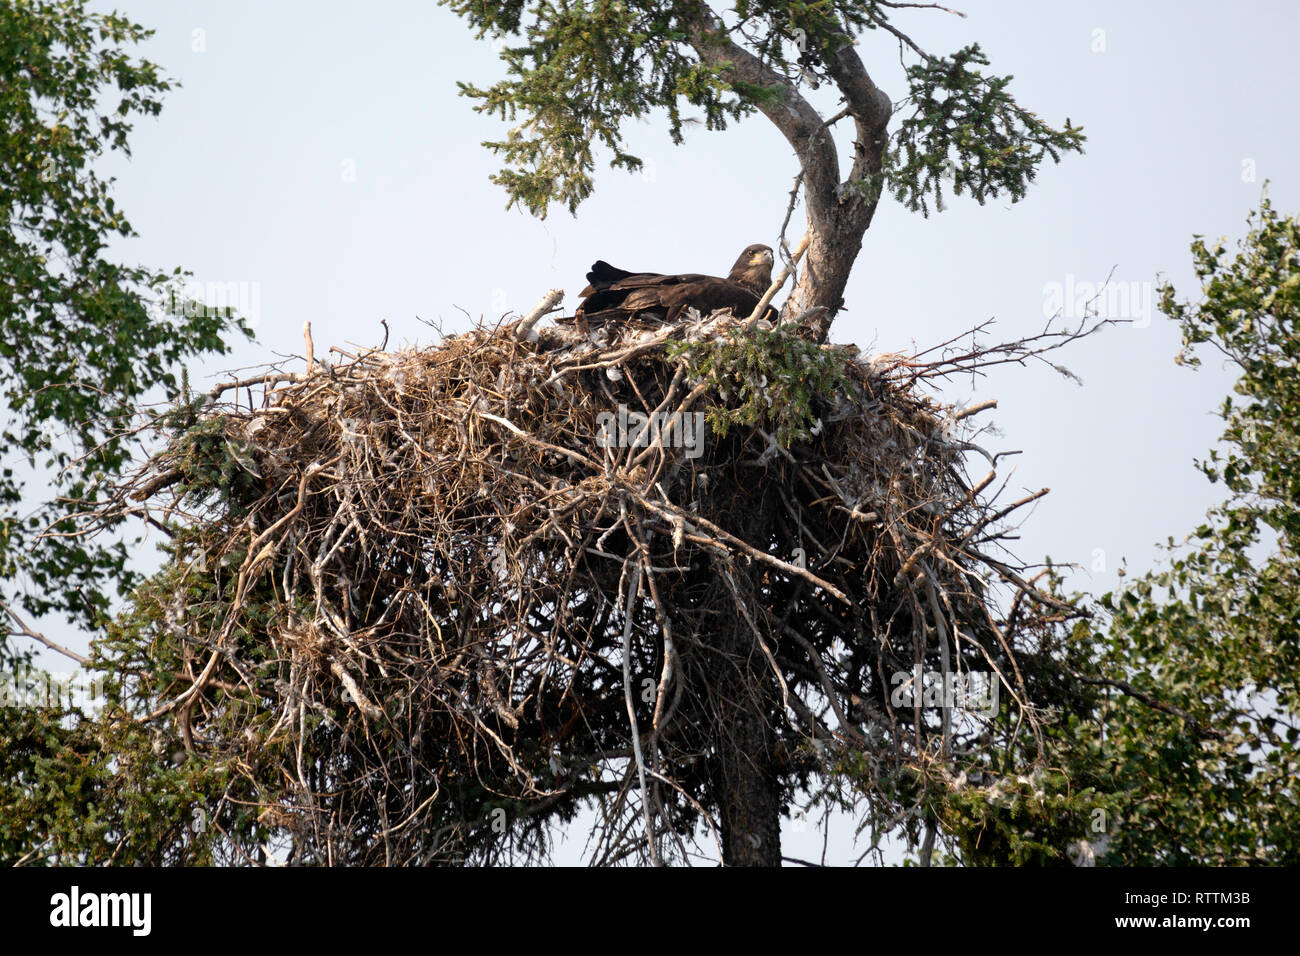 A golden eagle in its nest in orthern Manitoba, Canada. The nest is known as an eerie. Stock Photo